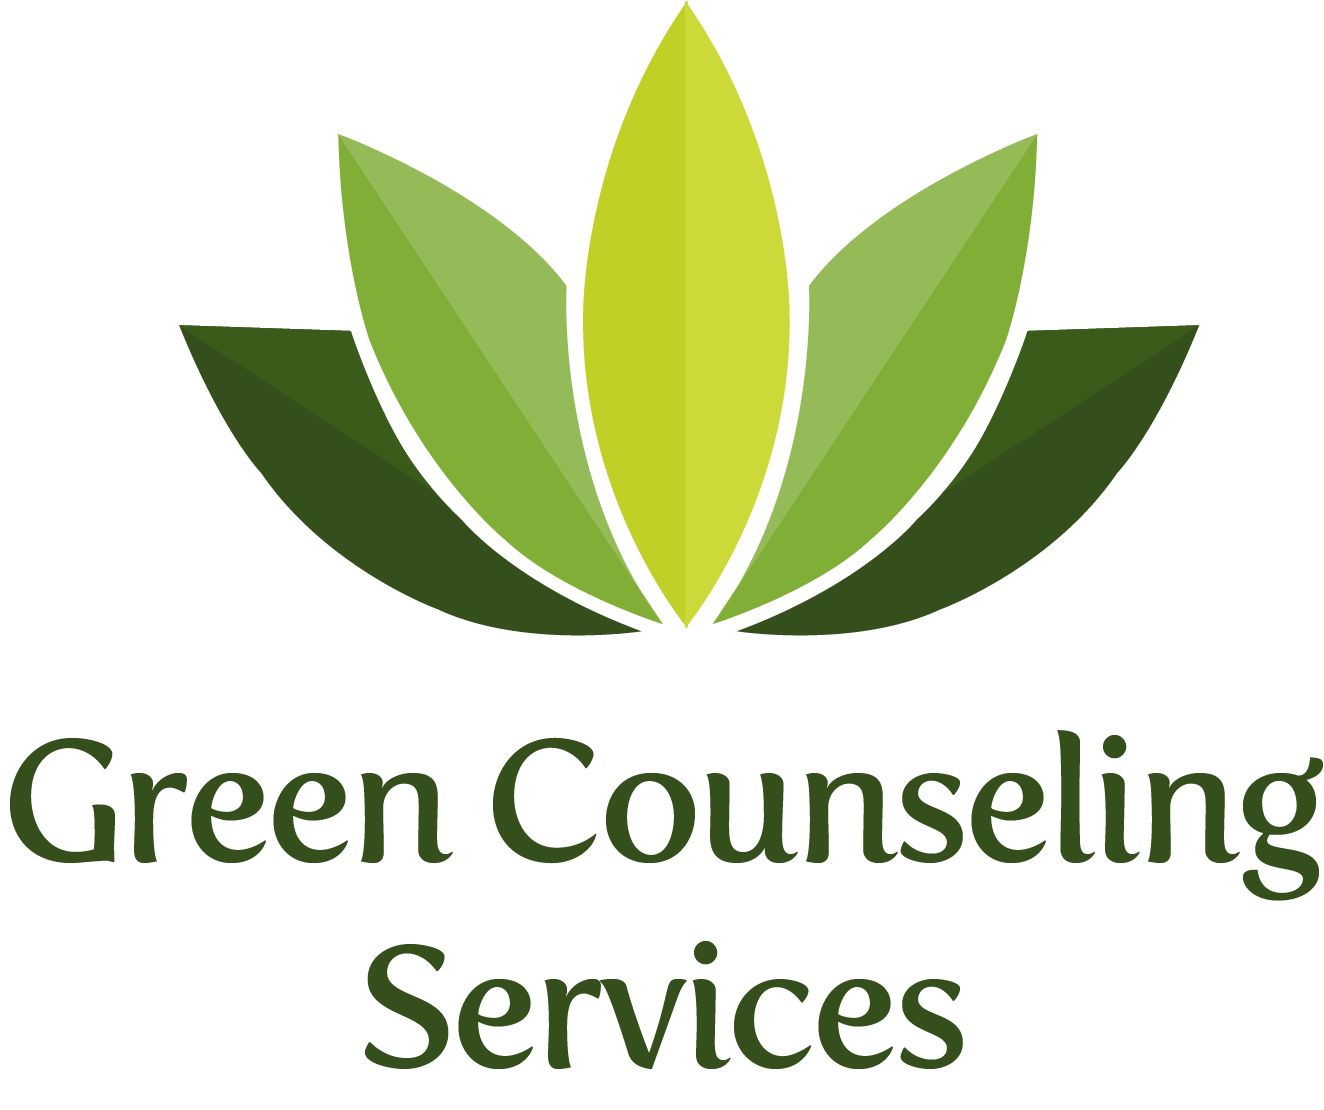 Green Counseling Services